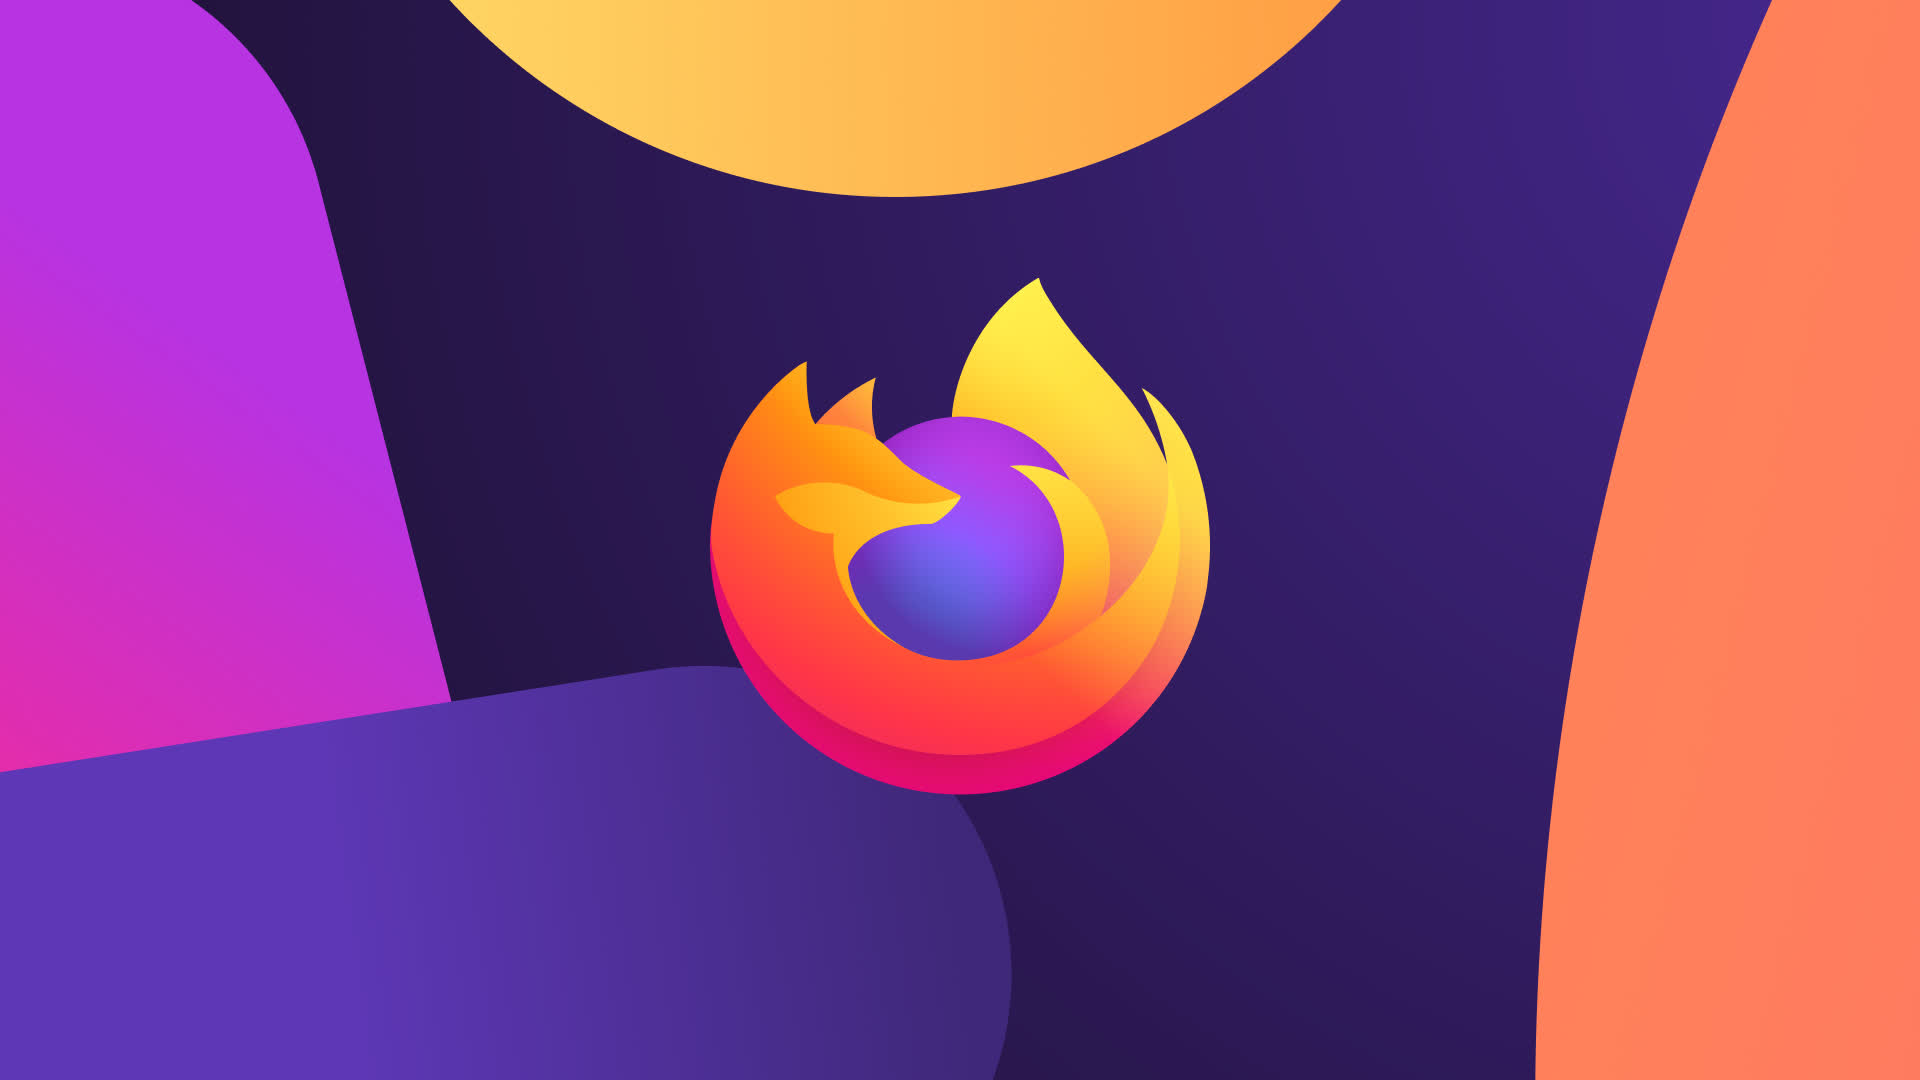 Mozilla patches two actively exploited zero-day vulnerabilities in Firefox